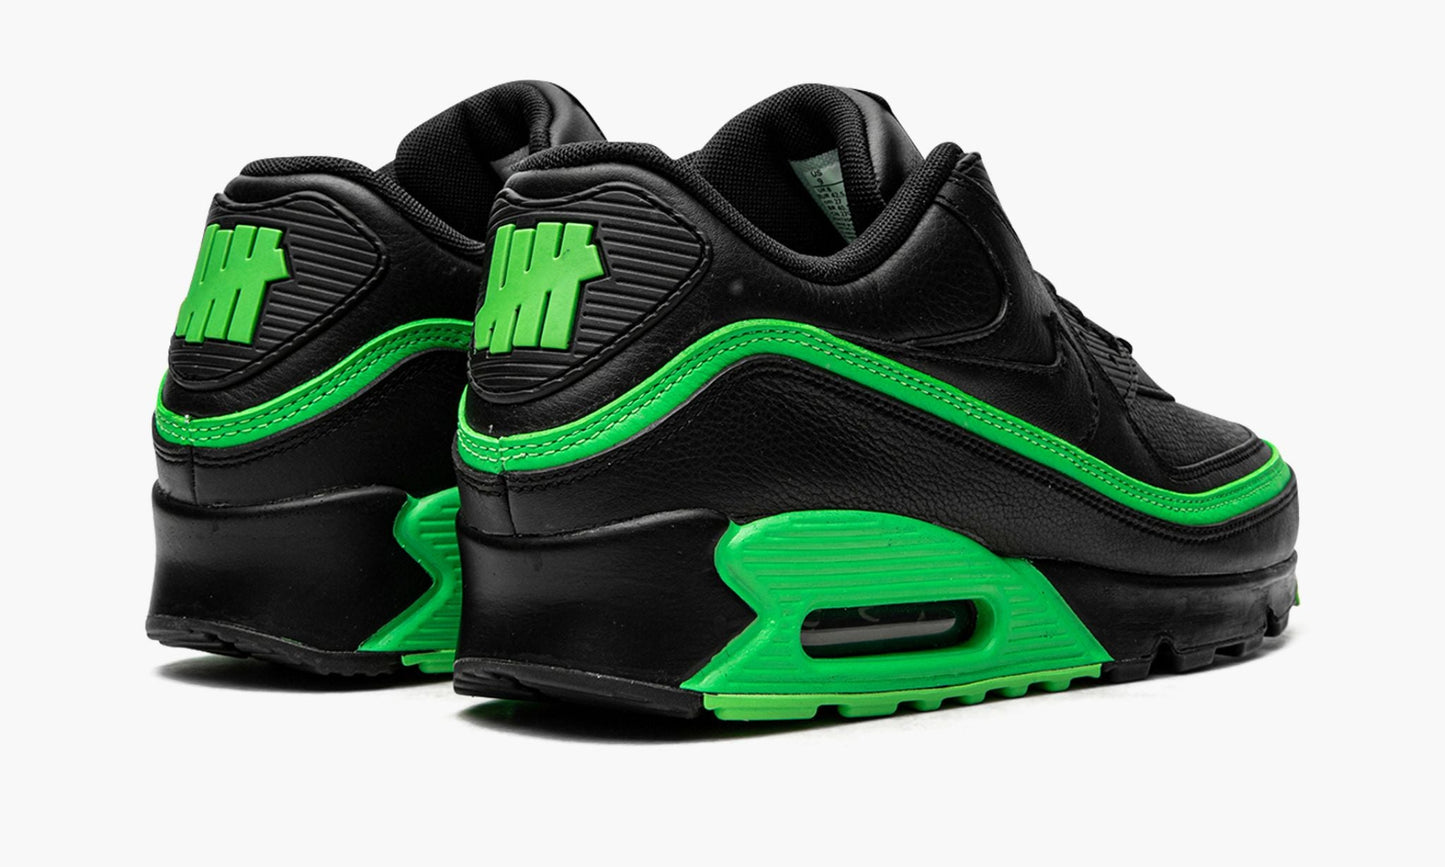 Air Max 90 / UNDFTD "Undefeated Black/Green"